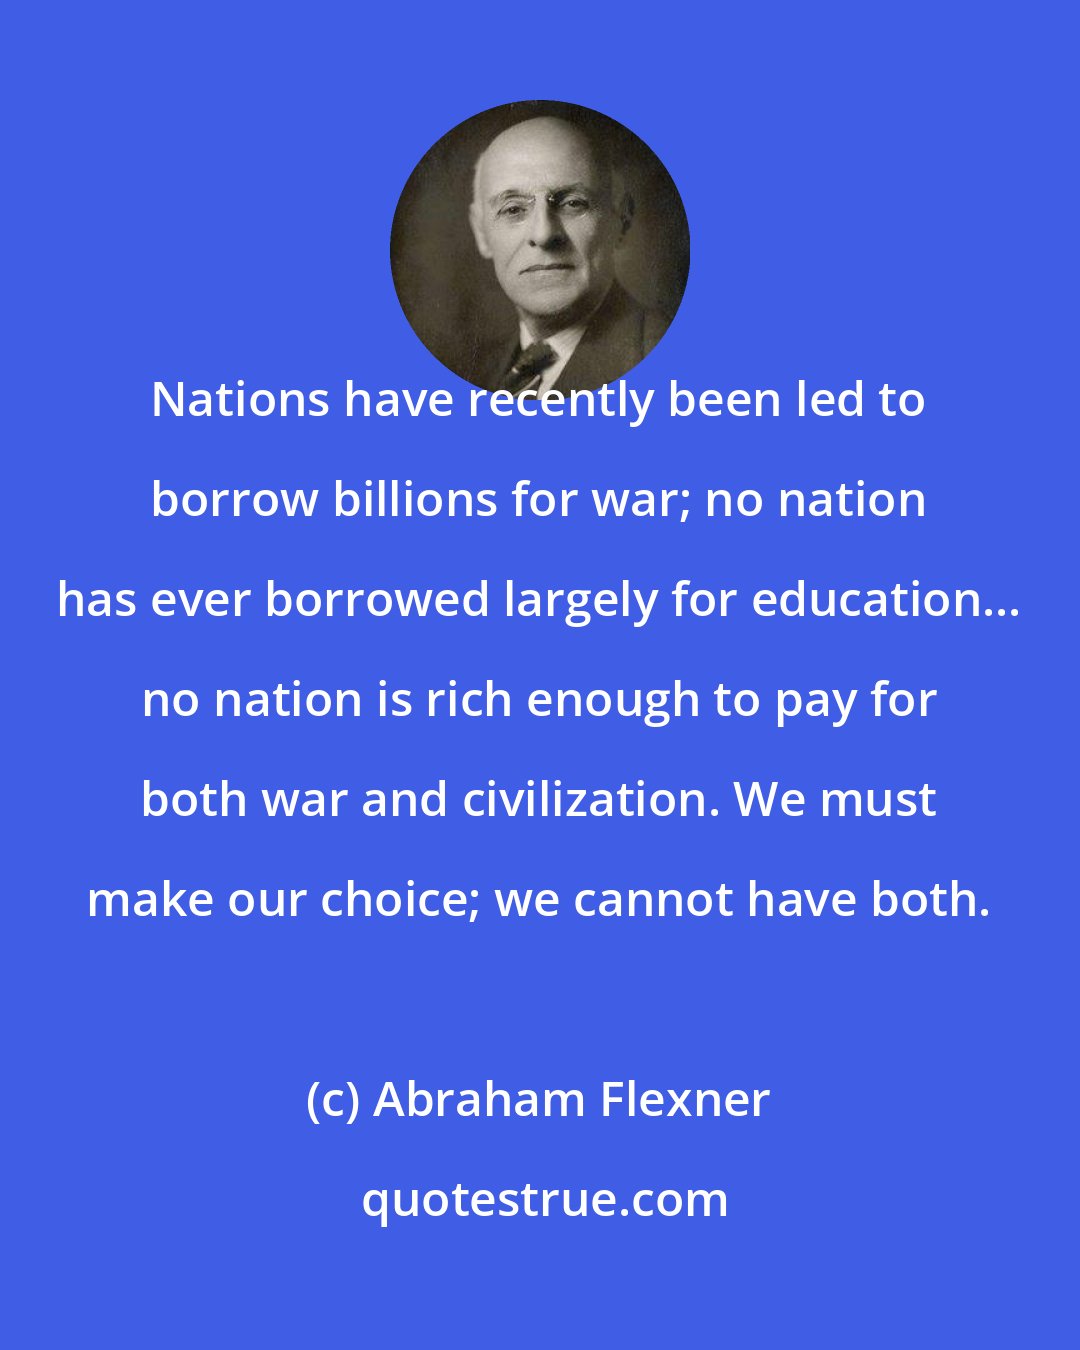 Abraham Flexner: Nations have recently been led to borrow billions for war; no nation has ever borrowed largely for education... no nation is rich enough to pay for both war and civilization. We must make our choice; we cannot have both.